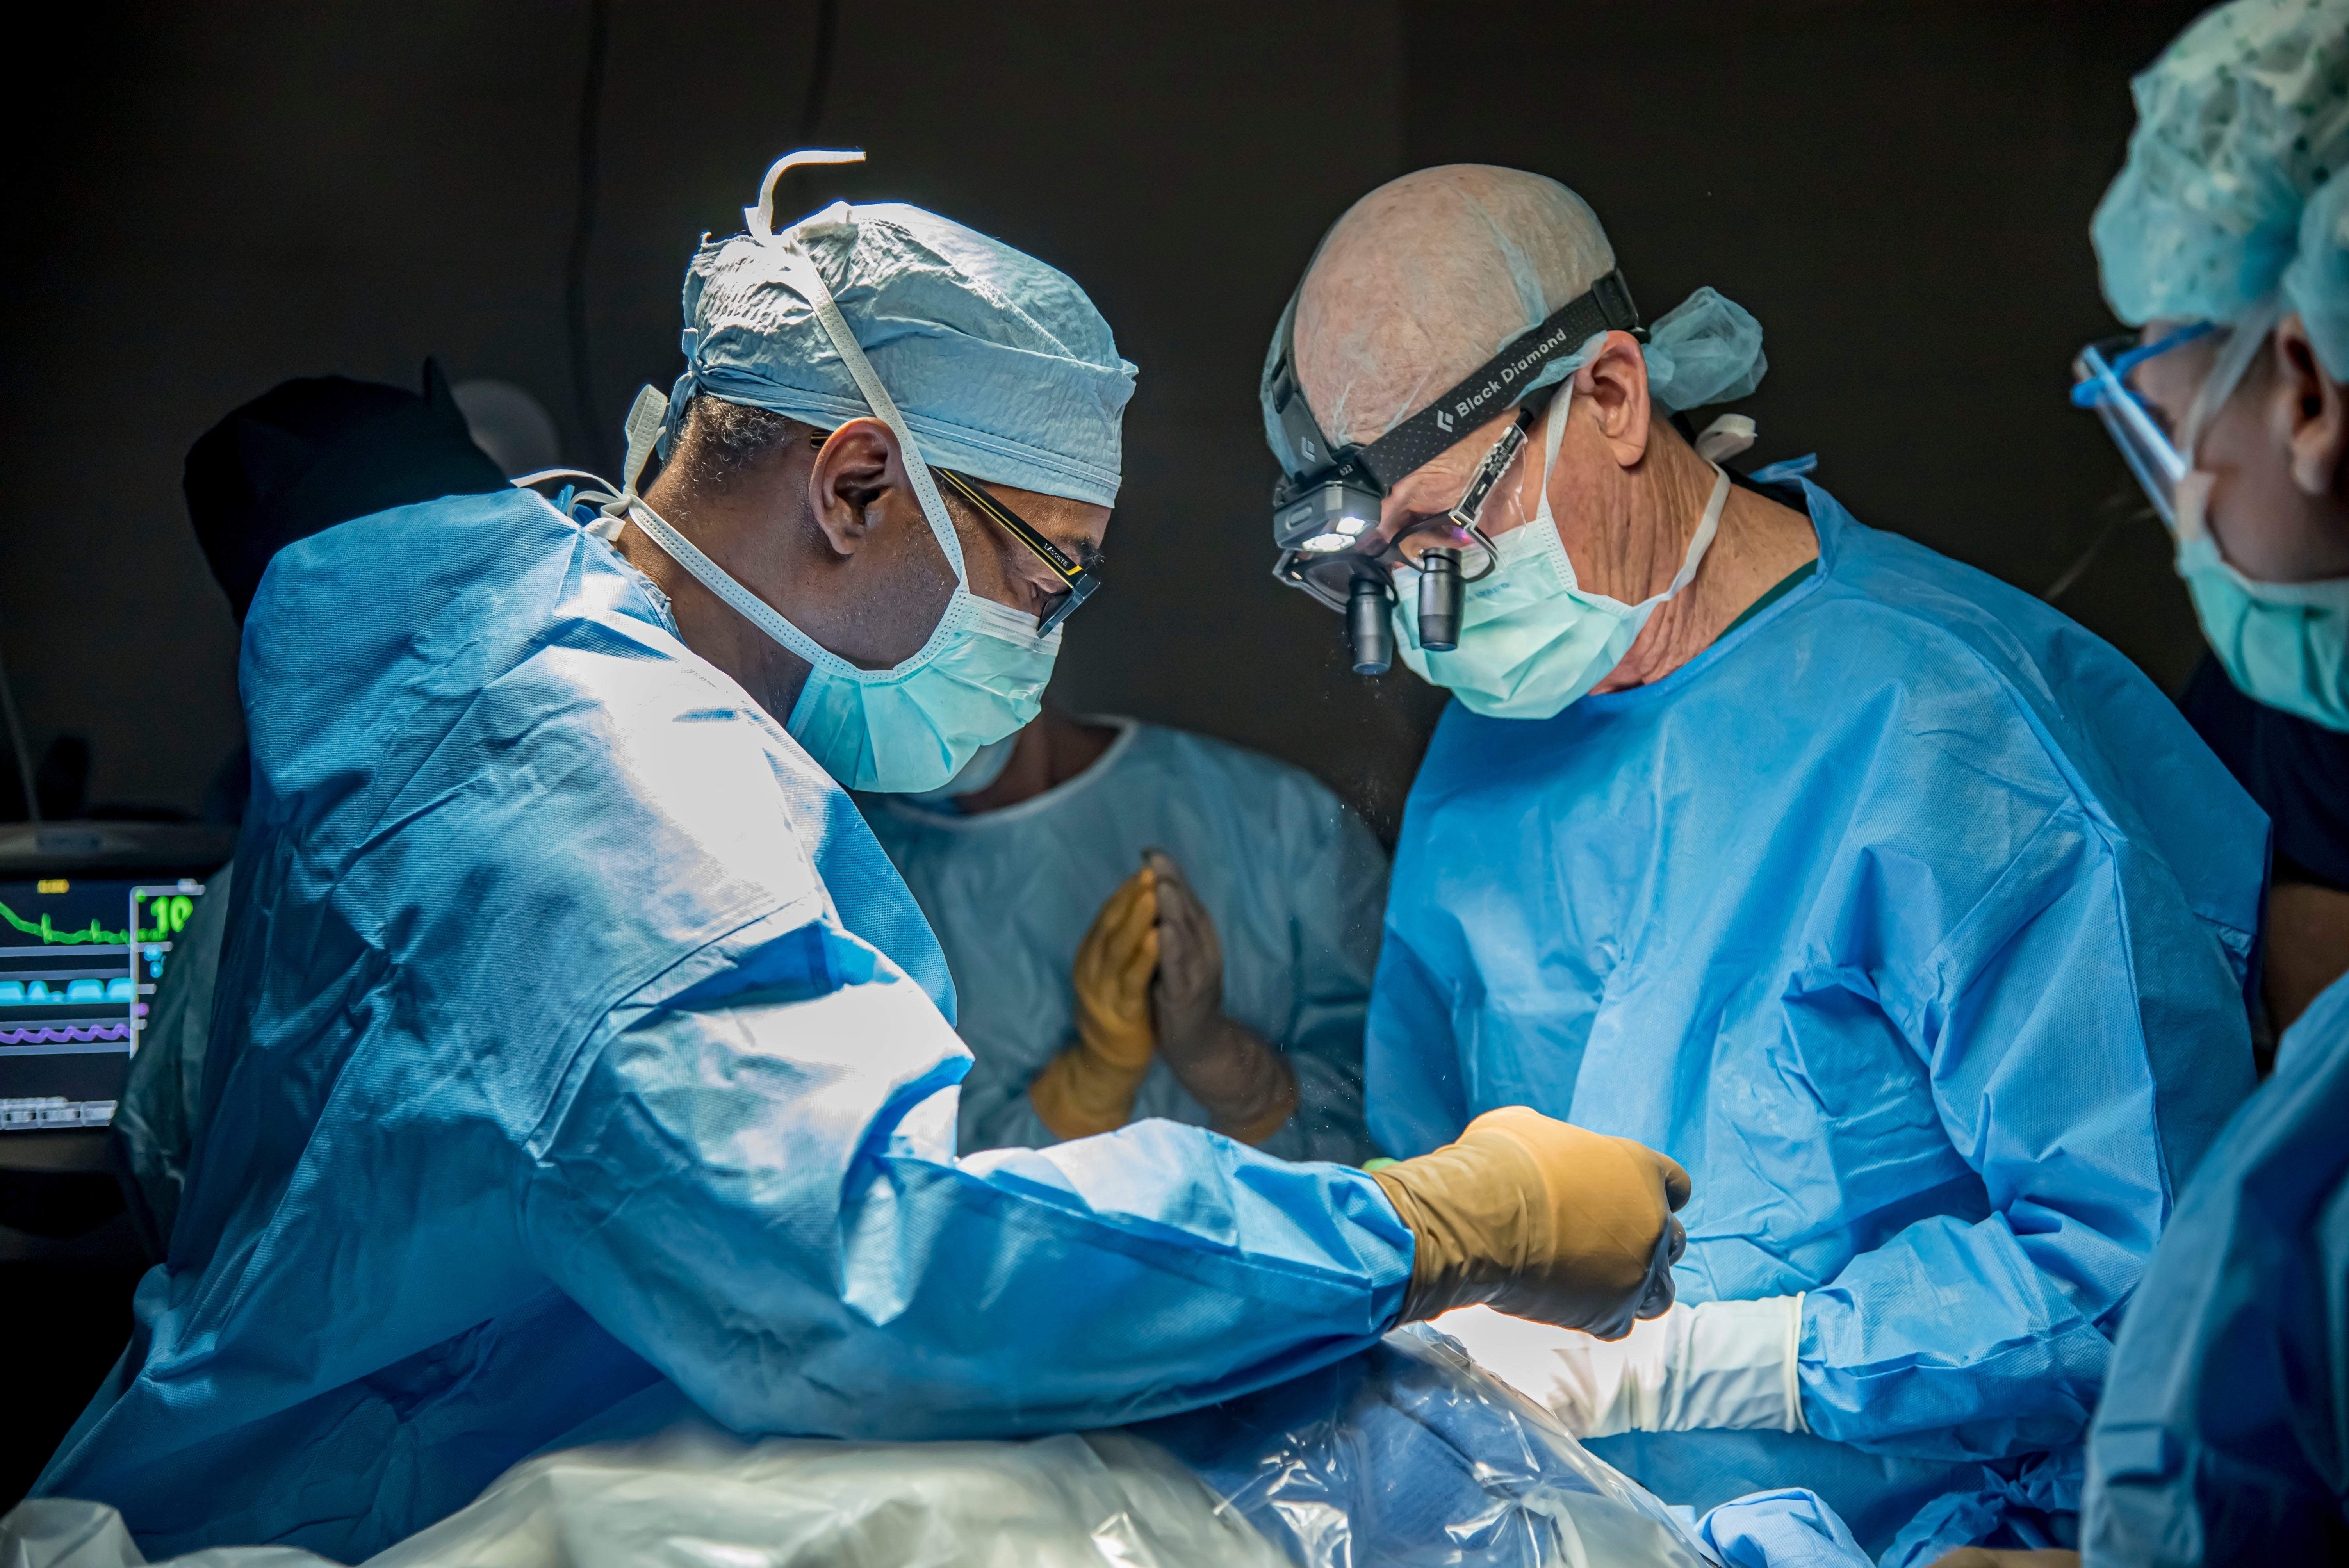 A medical team composed of personnel from the Milwaukee County Zoo, Froedtert Hospital and UW-Madison perform brain surgery on Qasai, one of the zoo’s prized bonobos.